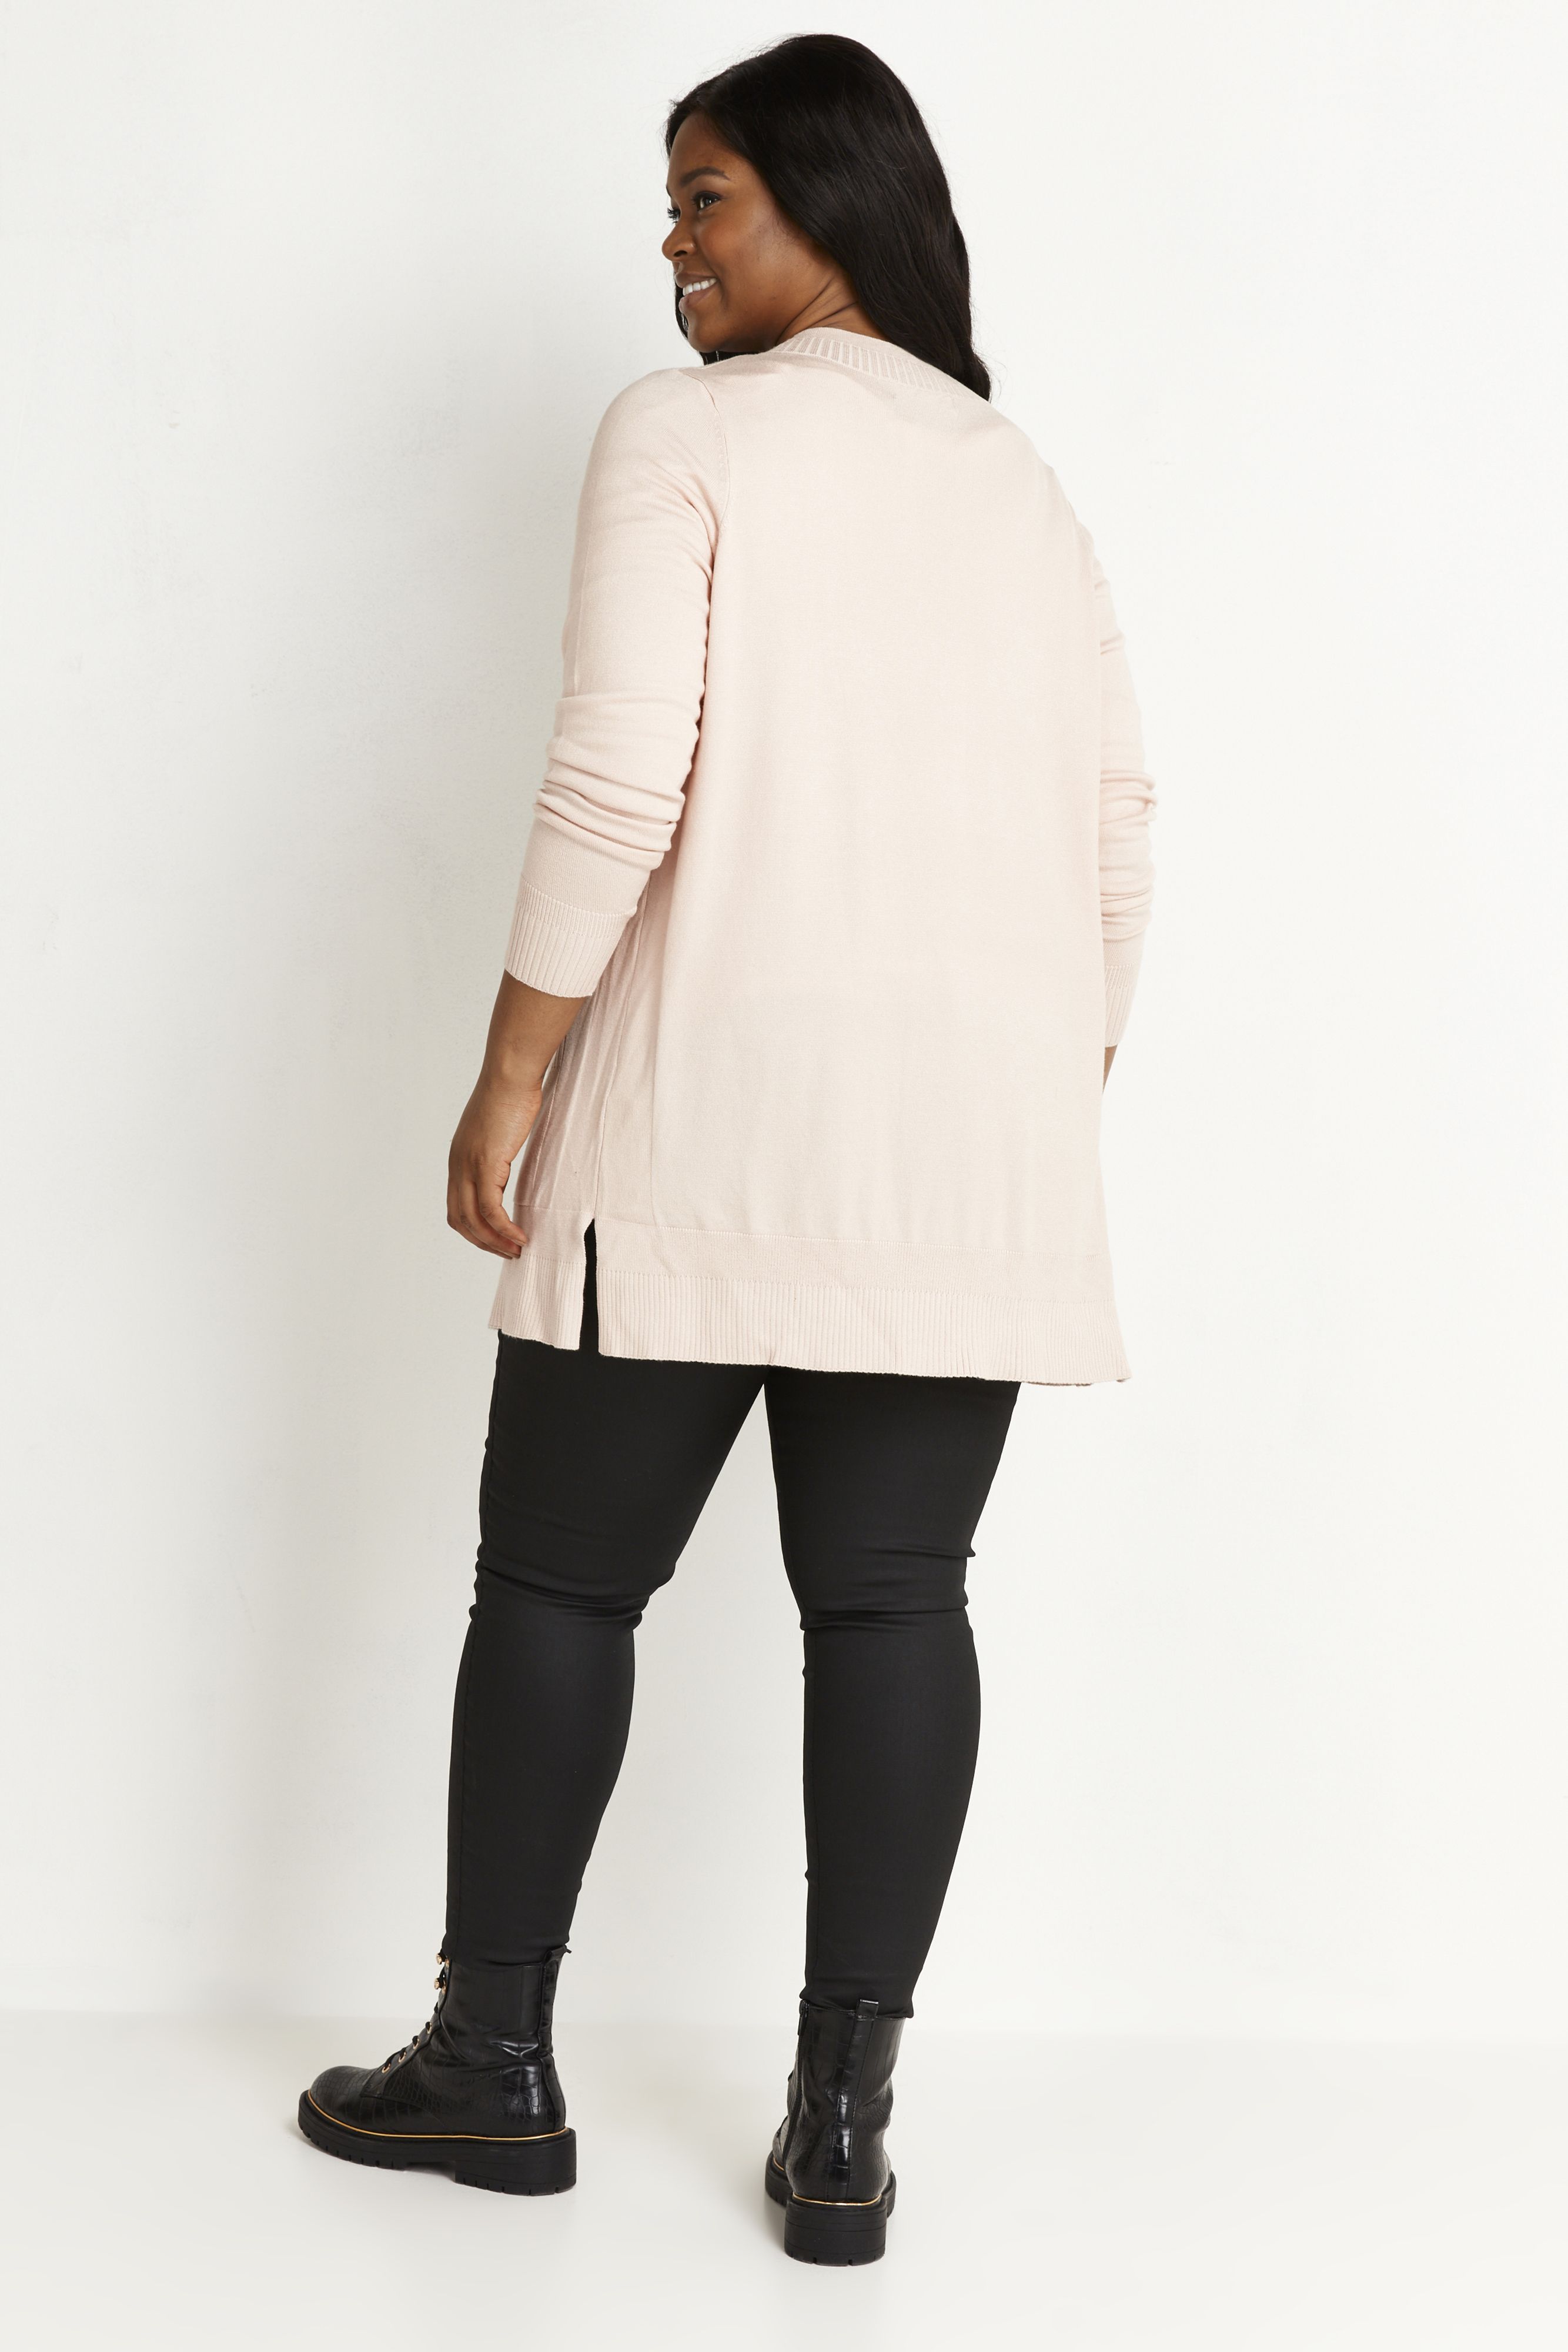 Cute, cosy and simple, the Fine Knit Cardigan is a go-to staple for crisp days. A timeless addition to your knitwear collection, the sweet pink hue brings a touch of femininity and soft colour. Key Features Include: - Open collarless neckline - Long sleeves - Stretch knit fabrication - Relaxed fit - Hip length Running the errands? Throw over your tee and jeans for easy styling. Just finish with a pair of fresh white trainers and you're good to go!